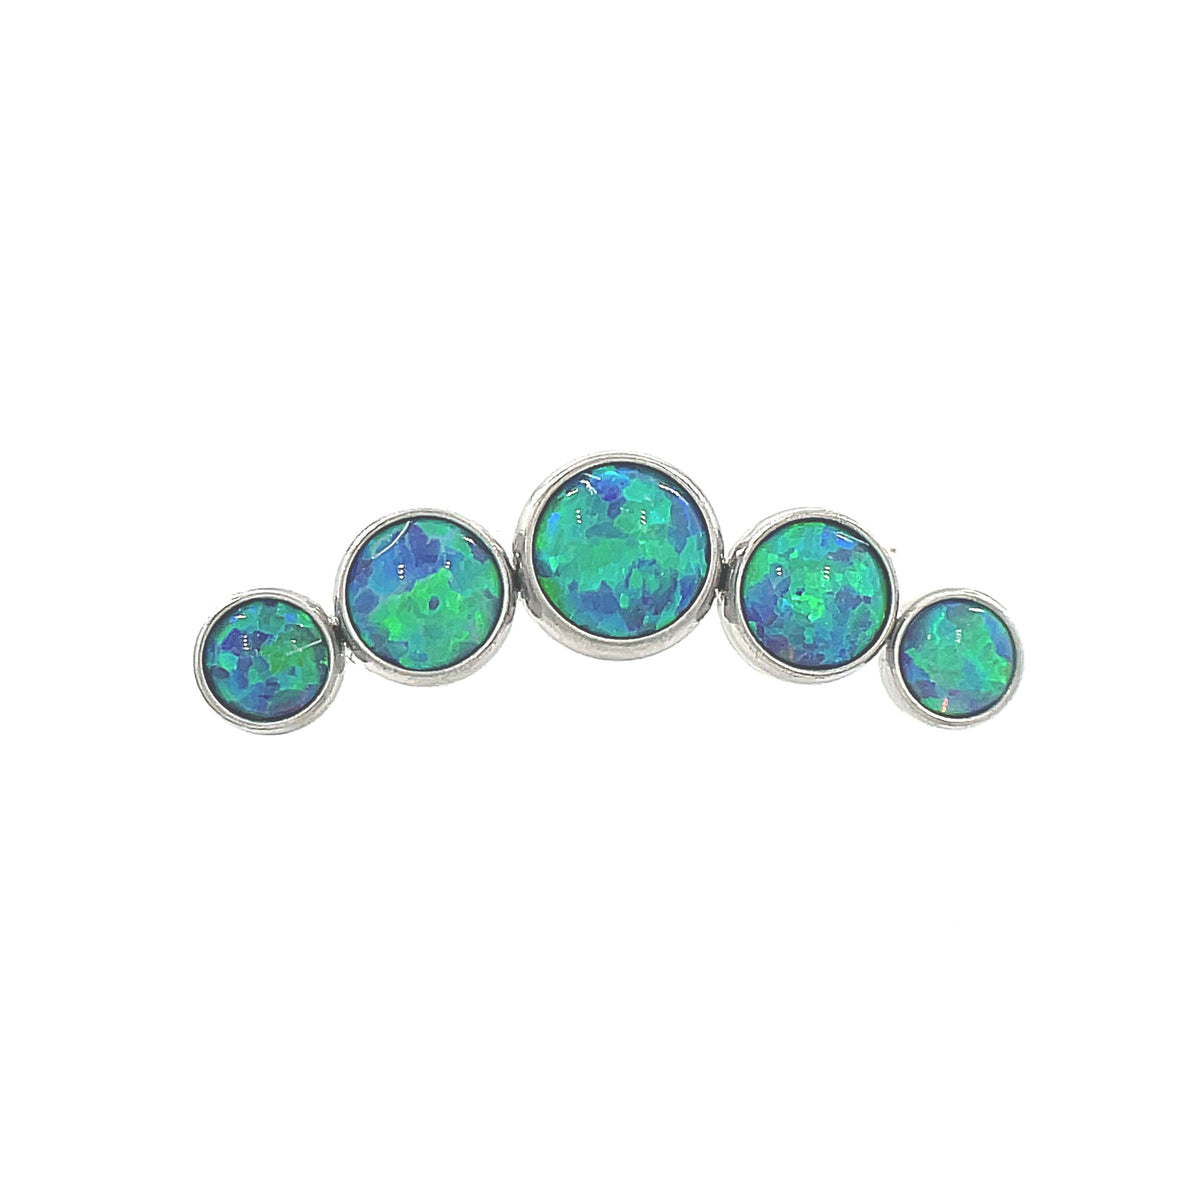 NeoMetal Peacock 5-Piece Opal Curved Cluster End